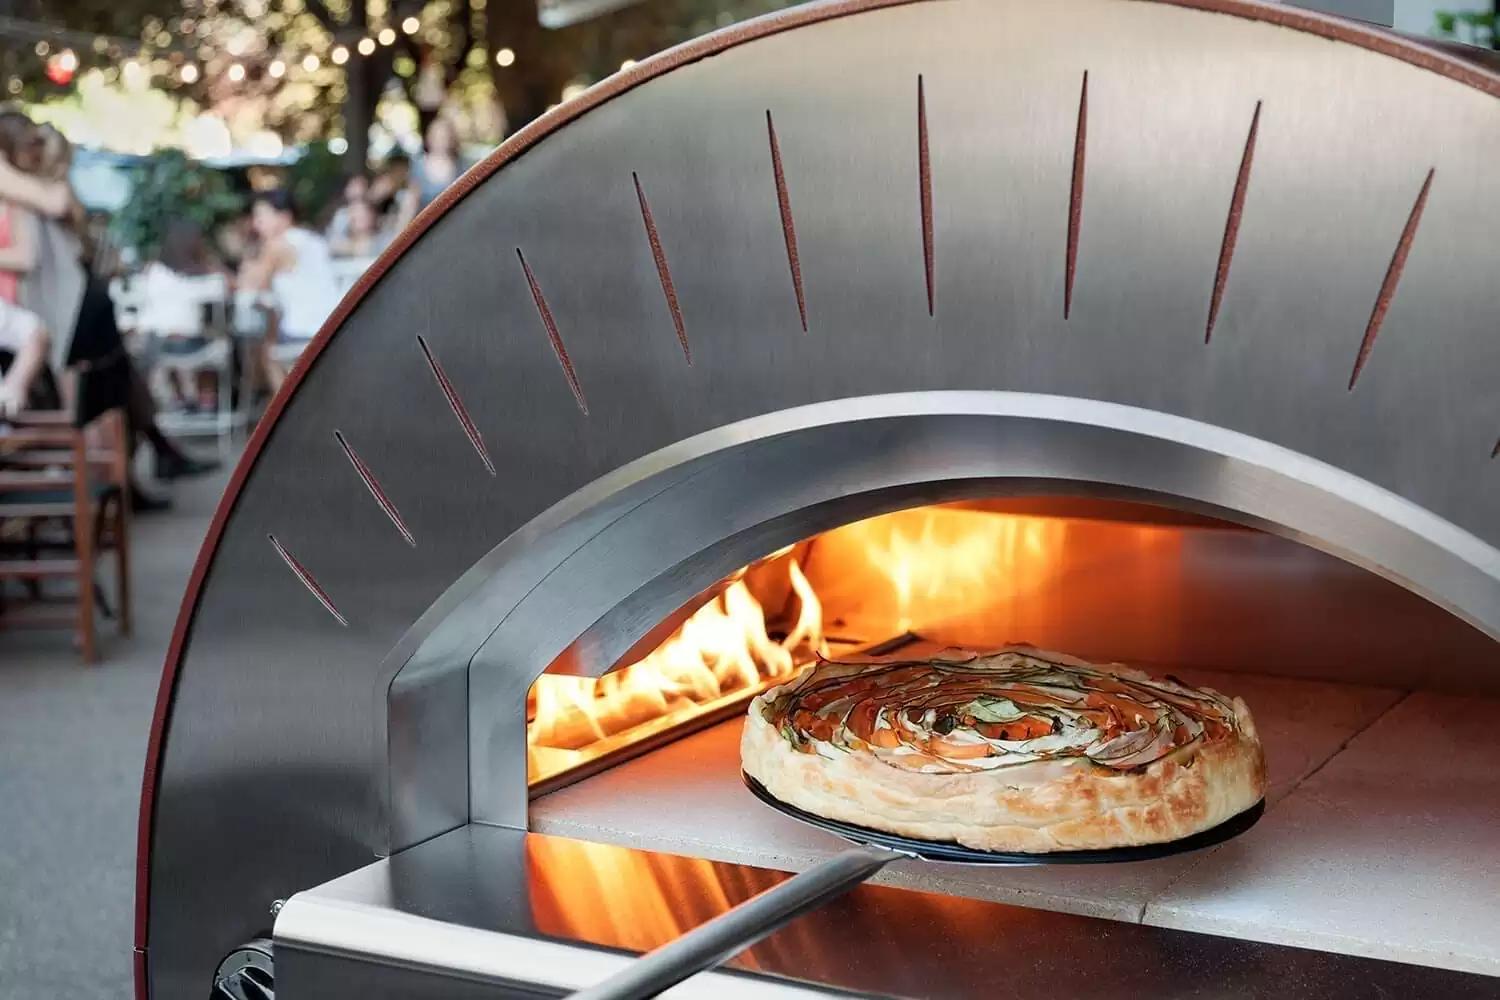 commercial gas pizza oven - What is a commercial pizza oven called